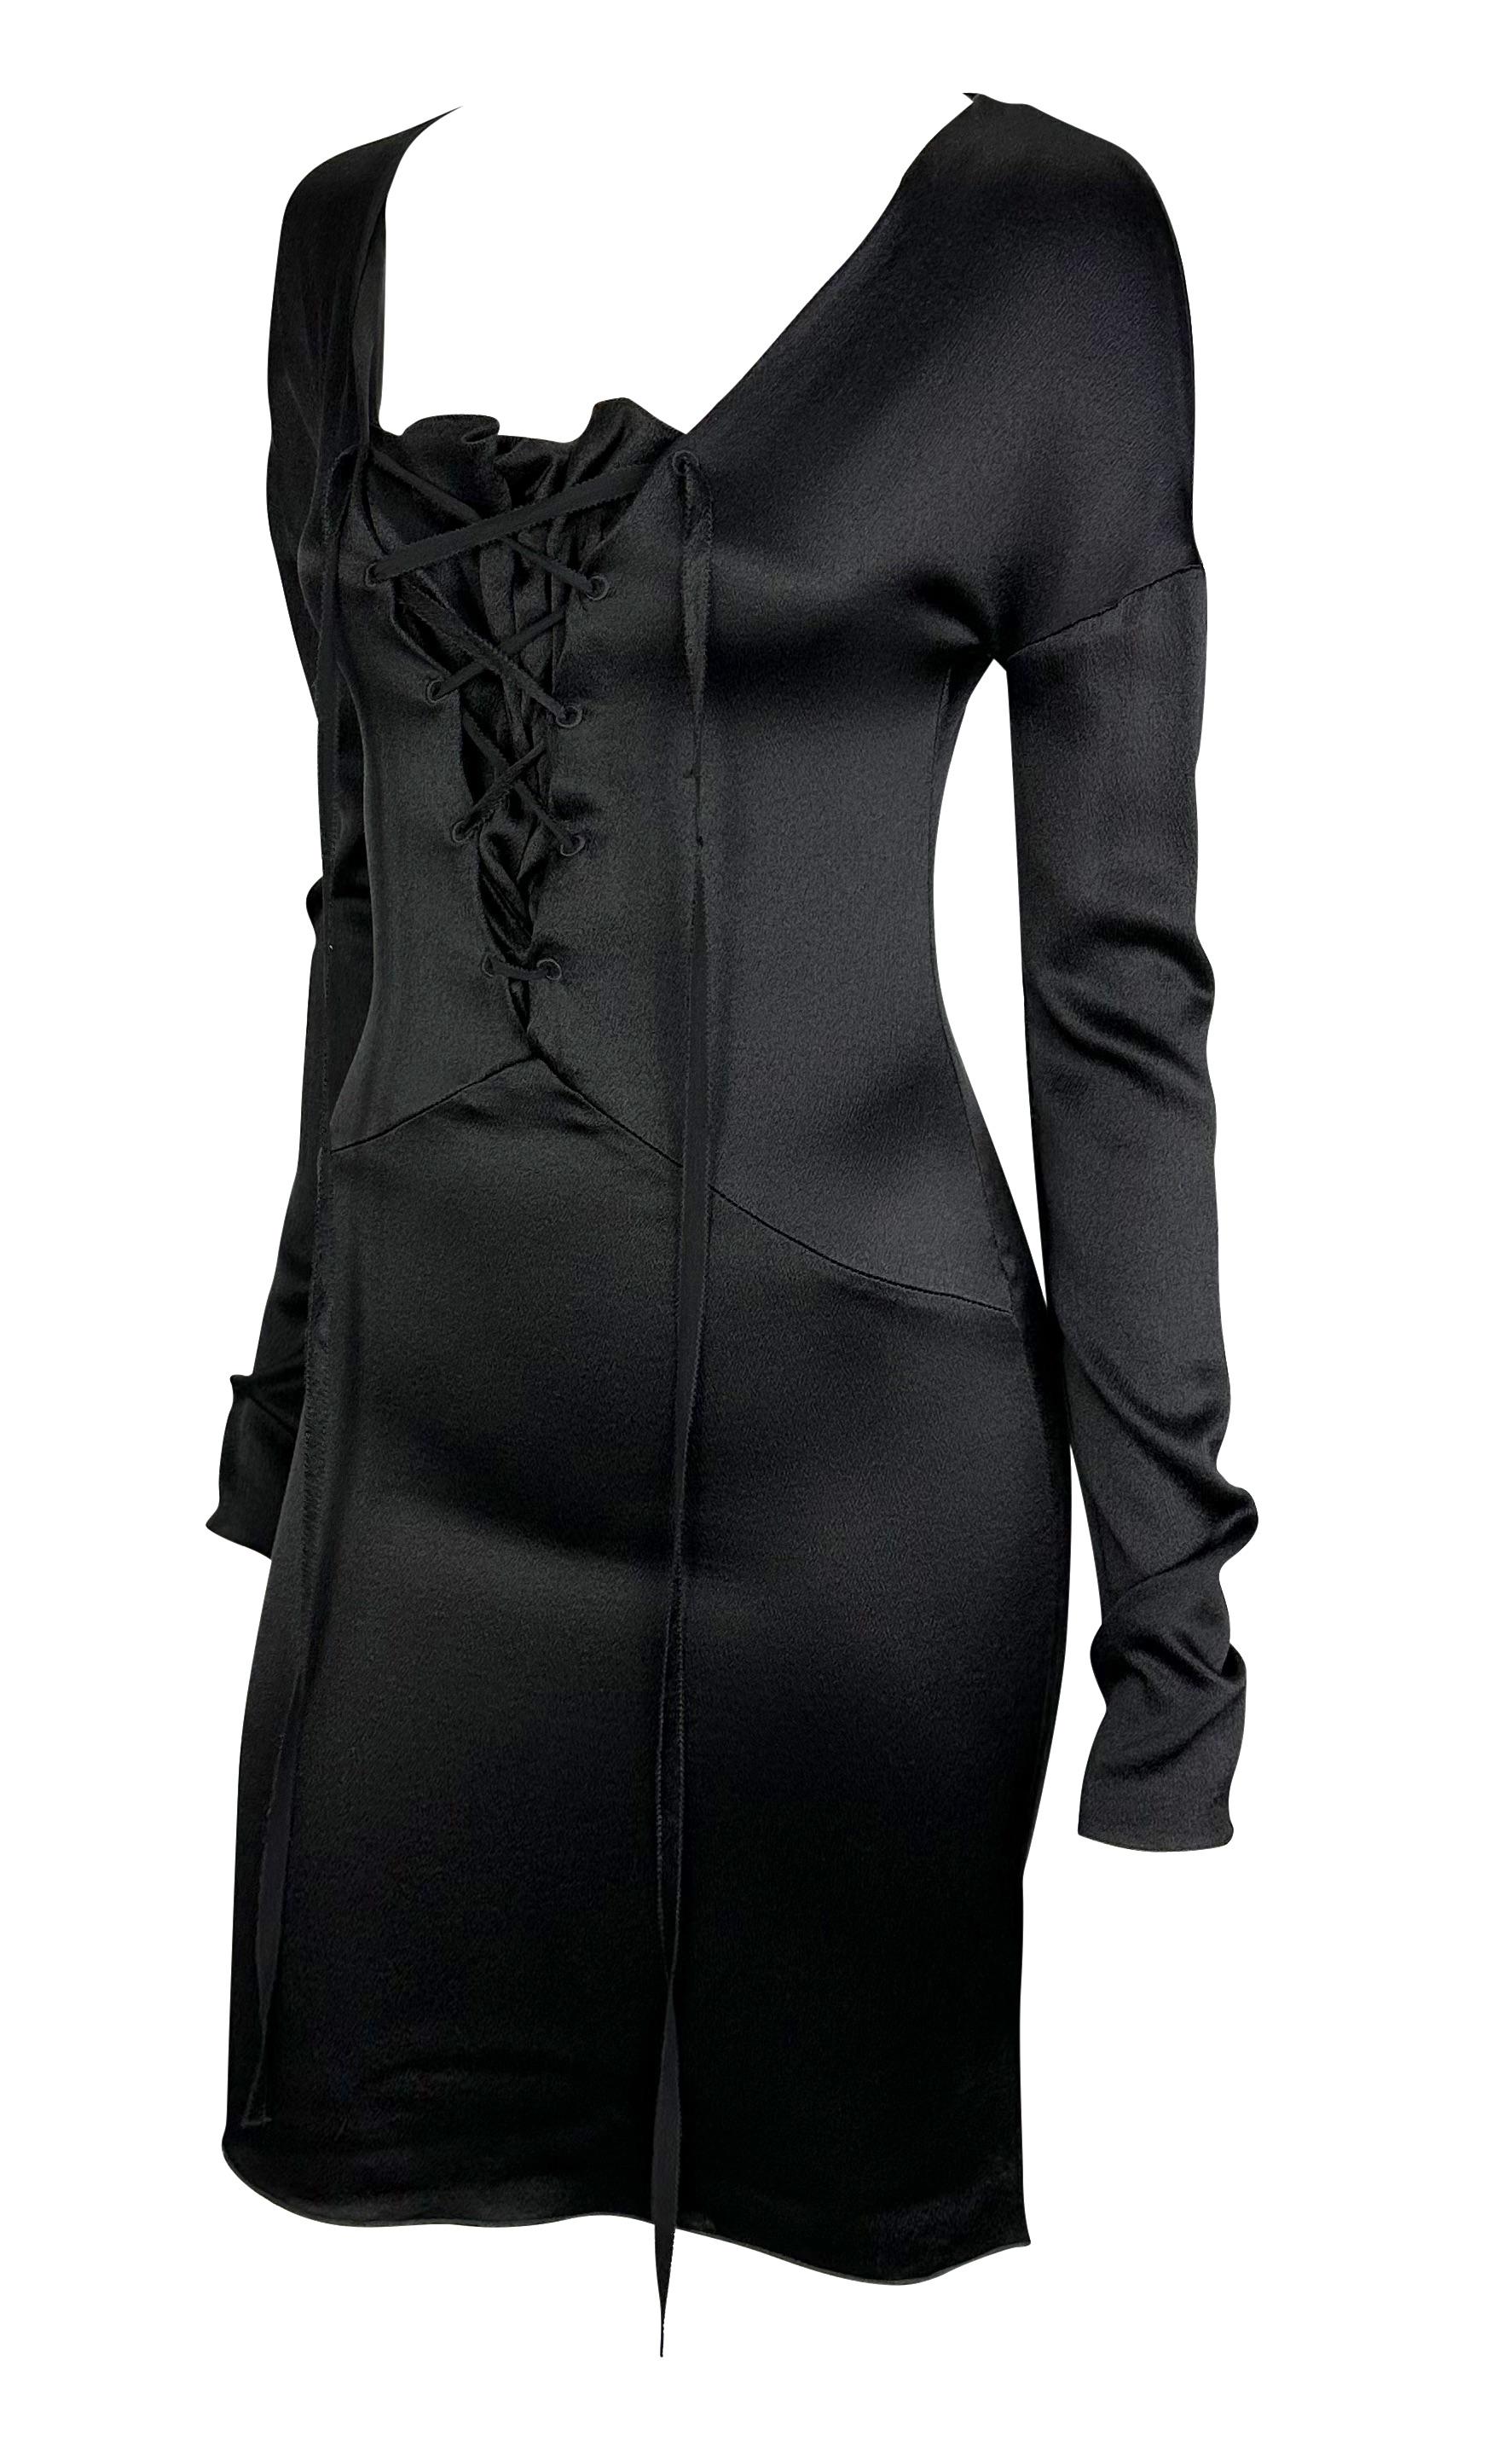 Presenting a punk rock goth-inspired Gucci mini dress, designed by Tom Ford. From the Fall/Winter 2002 collection, this silk dress features a lace-up center and long sleeves. Both the hem and the cuffs feature a slight flare. One of Tom Ford's